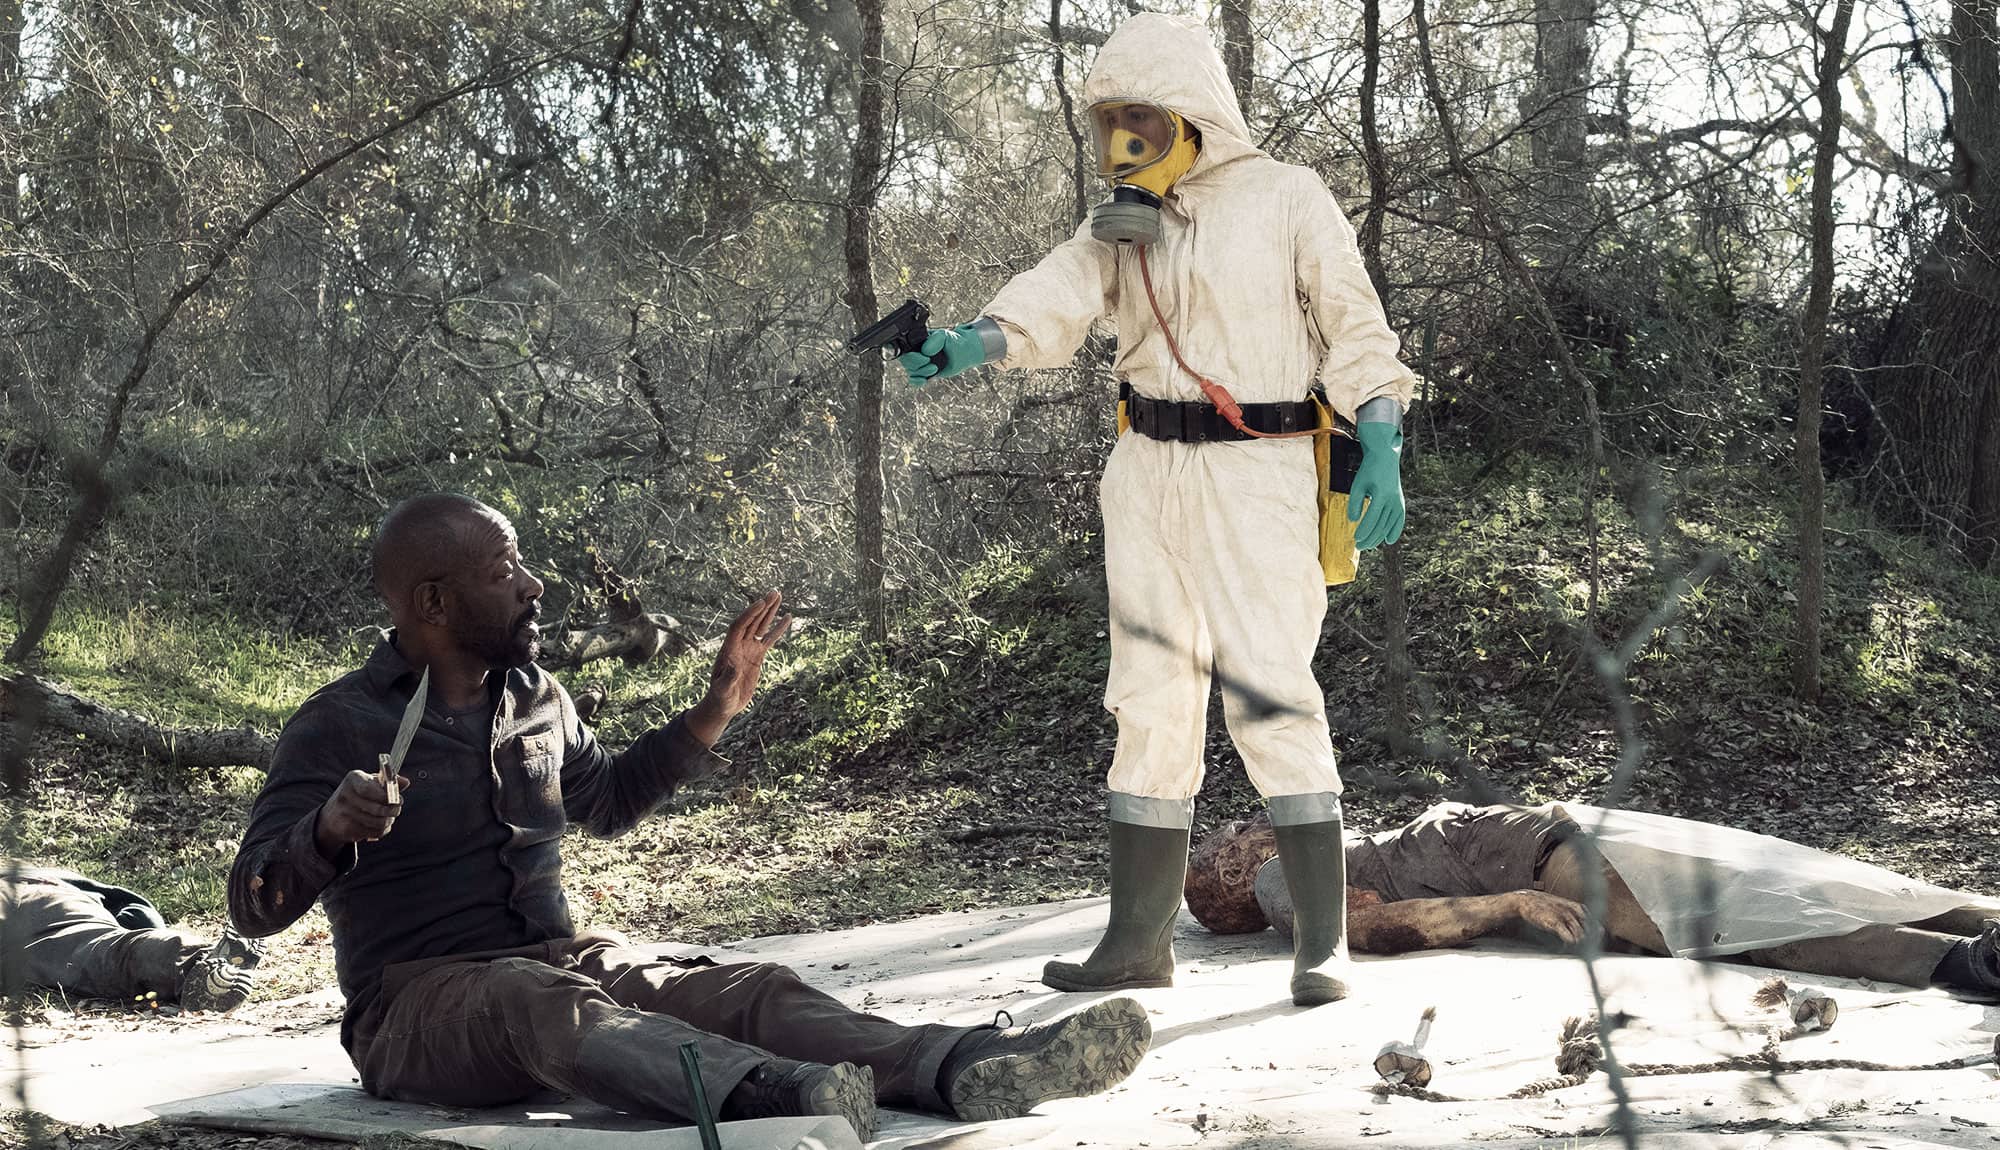 The Best Images From Fear the Walking Dead Season 5 Episode 2